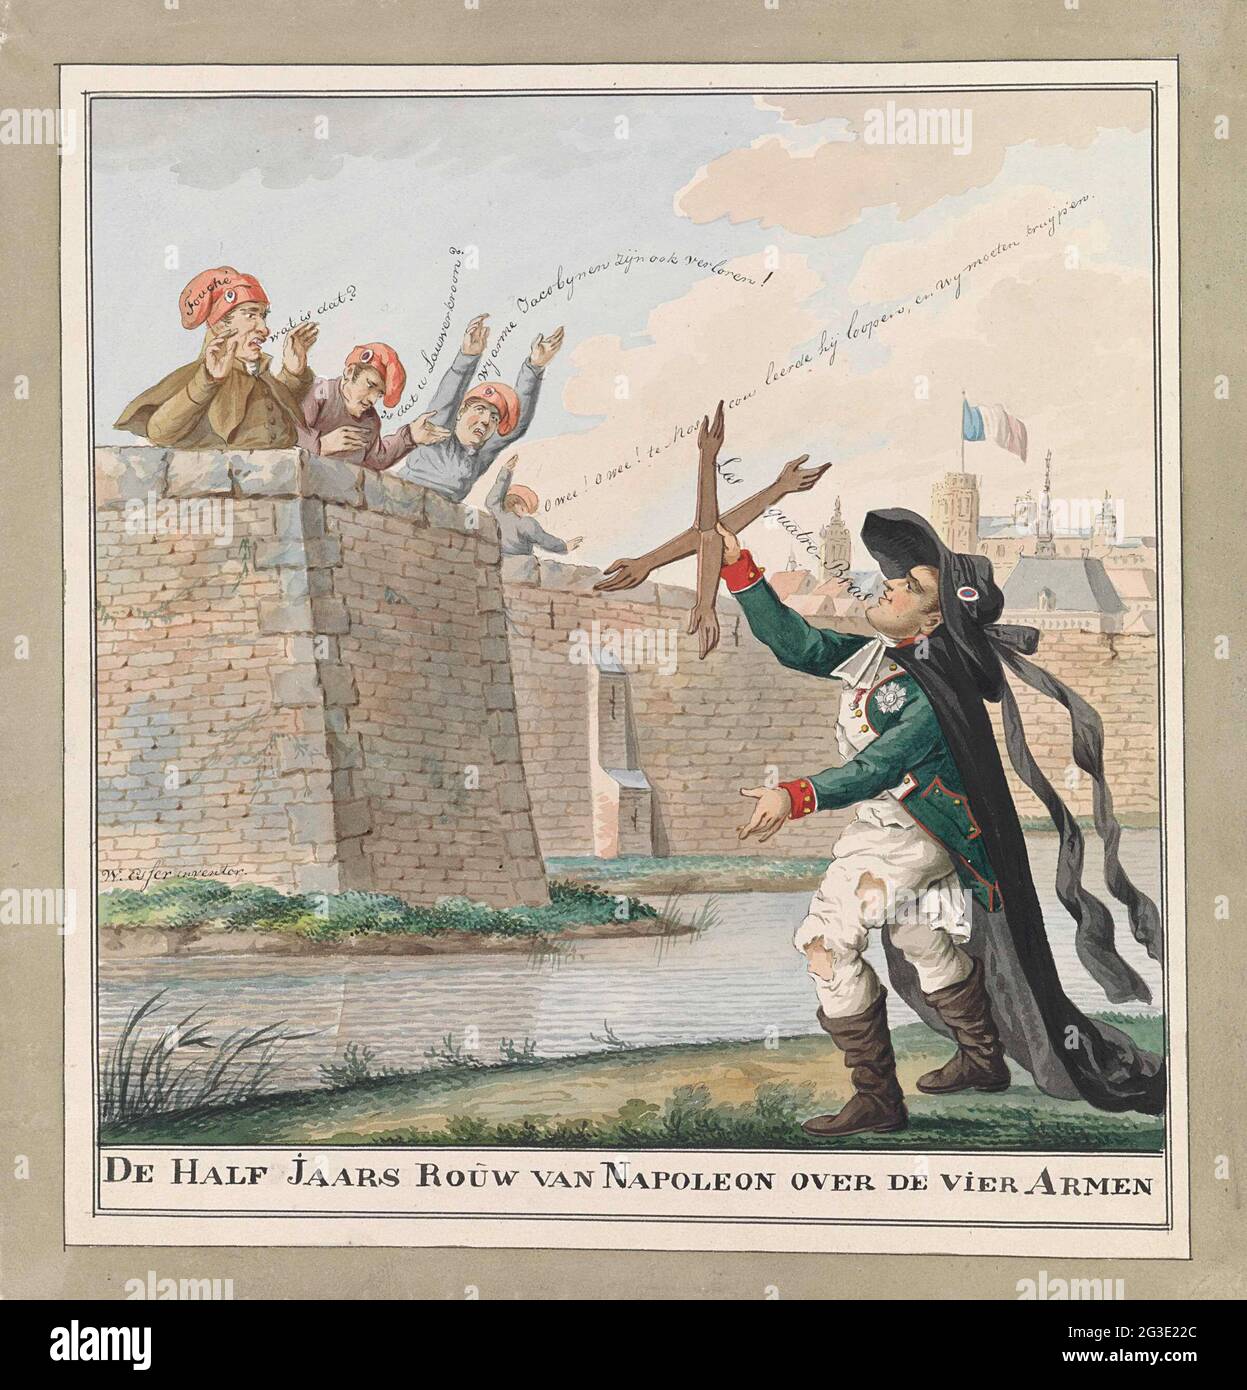 Return of Napoleon in Paris after Waterloo, 1815; The half-yearly mourning  Napoleon over the four arms. Cartoon on the return of Napoleon in Paris  after the lost blow at Waterloo, June 20,